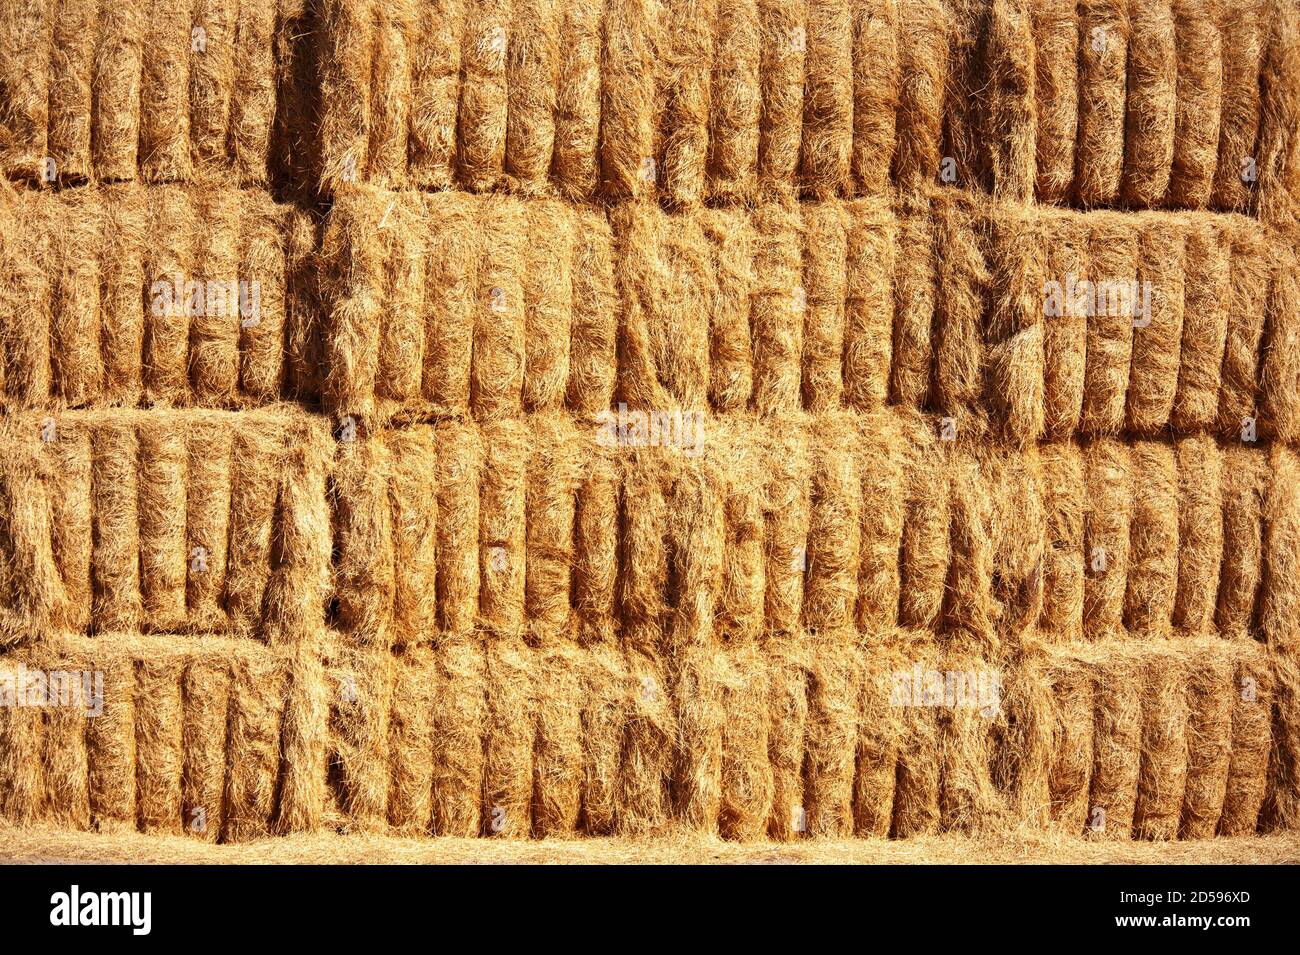 Close-up of a stack of hay bales in a field, USA Stock Photo